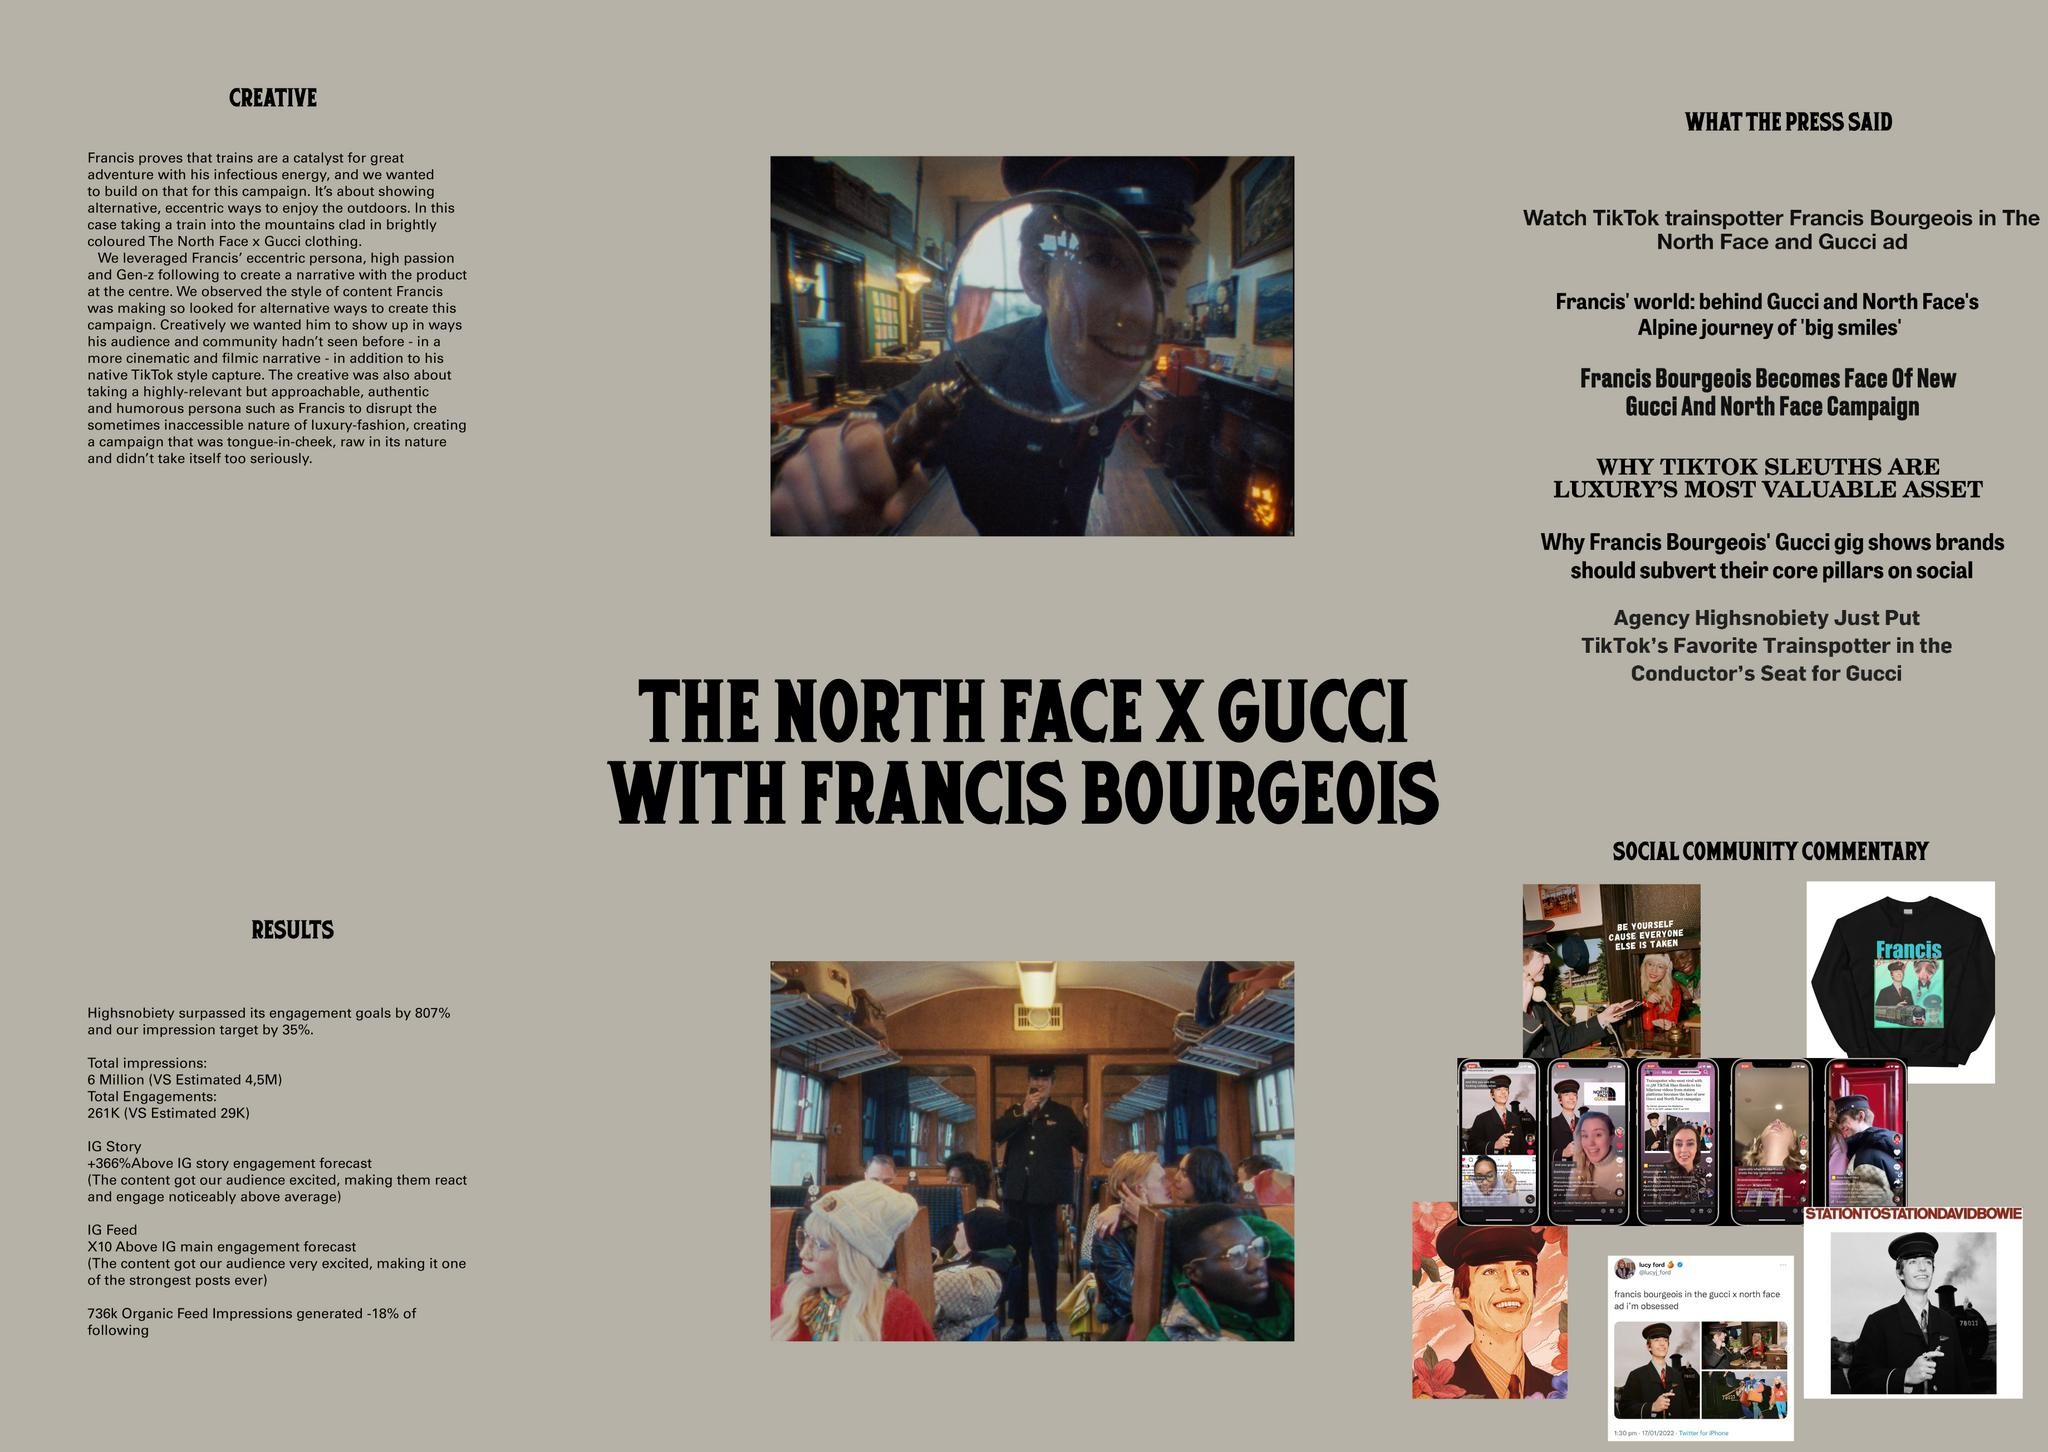 The North Face x Gucci with Francis Bourgeois